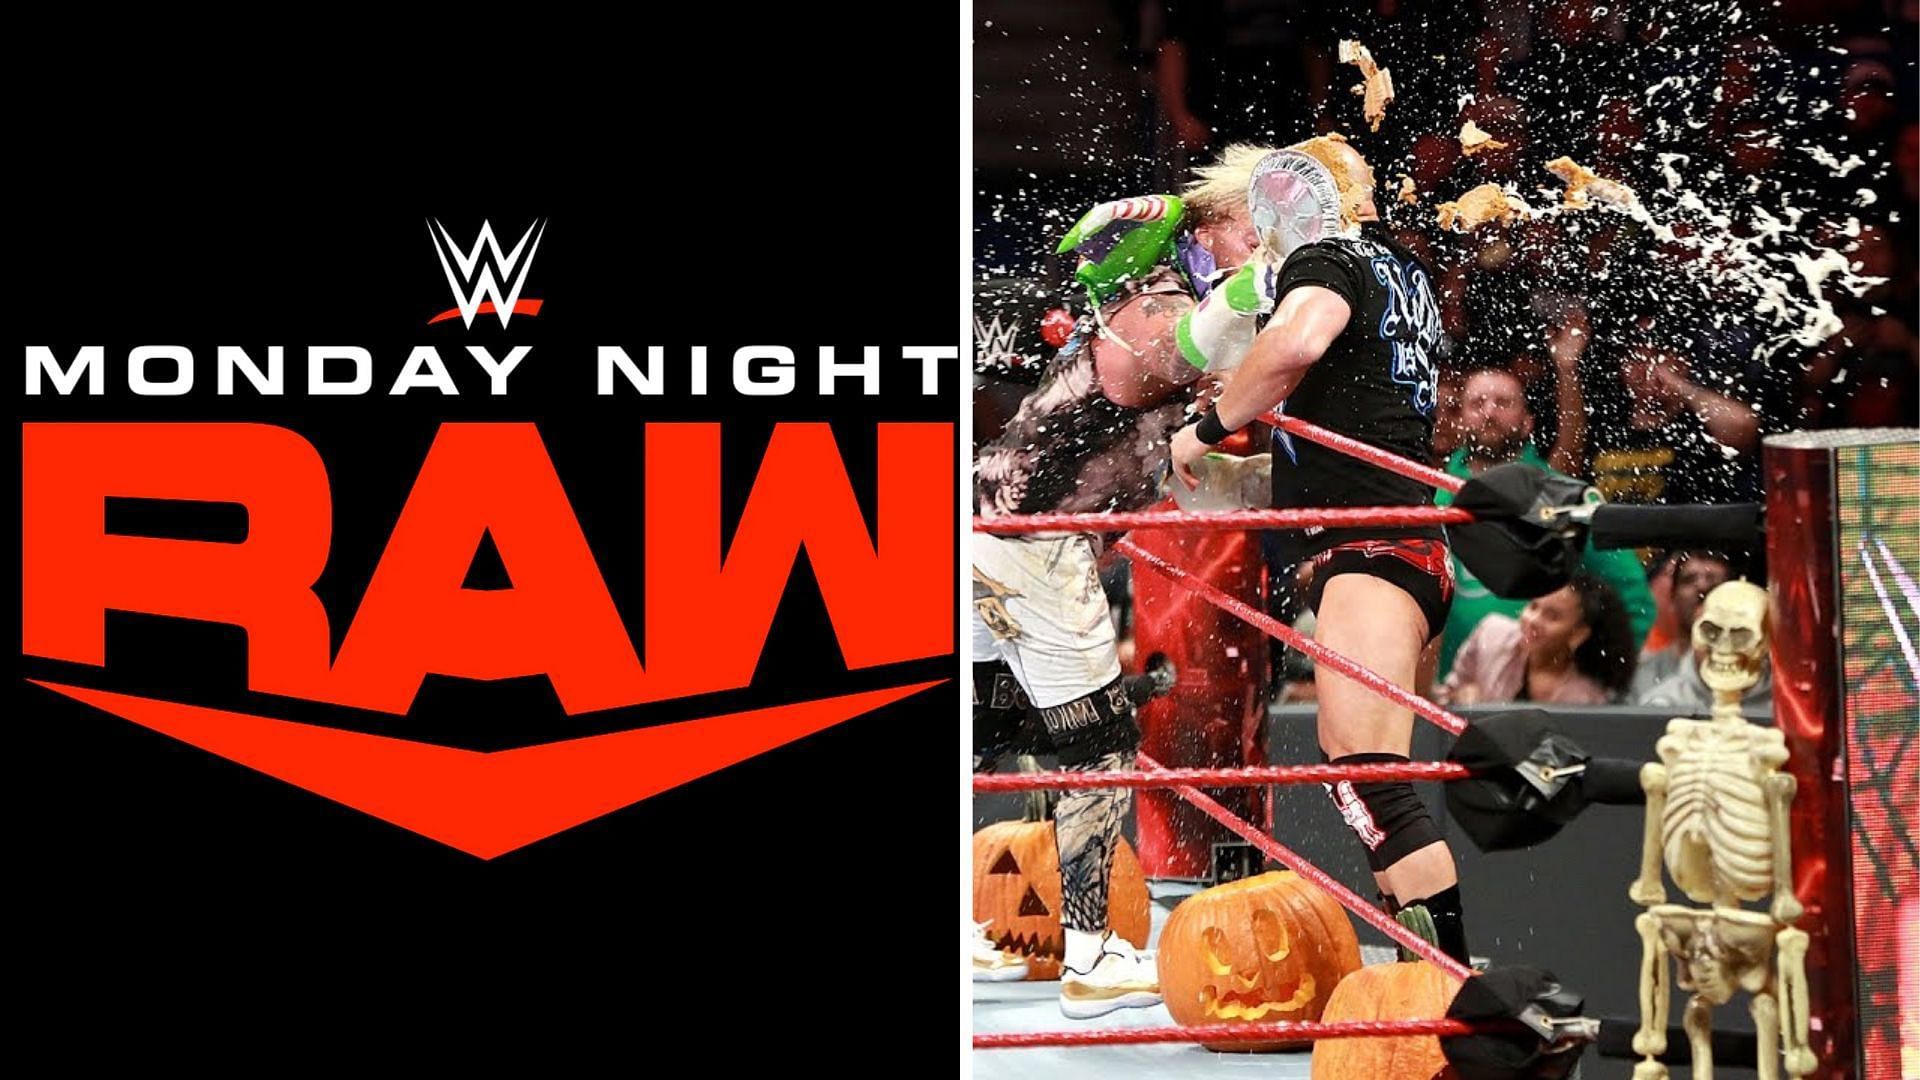 WWE RAW will a Trick or Street Fight tonight on the Halloween episode